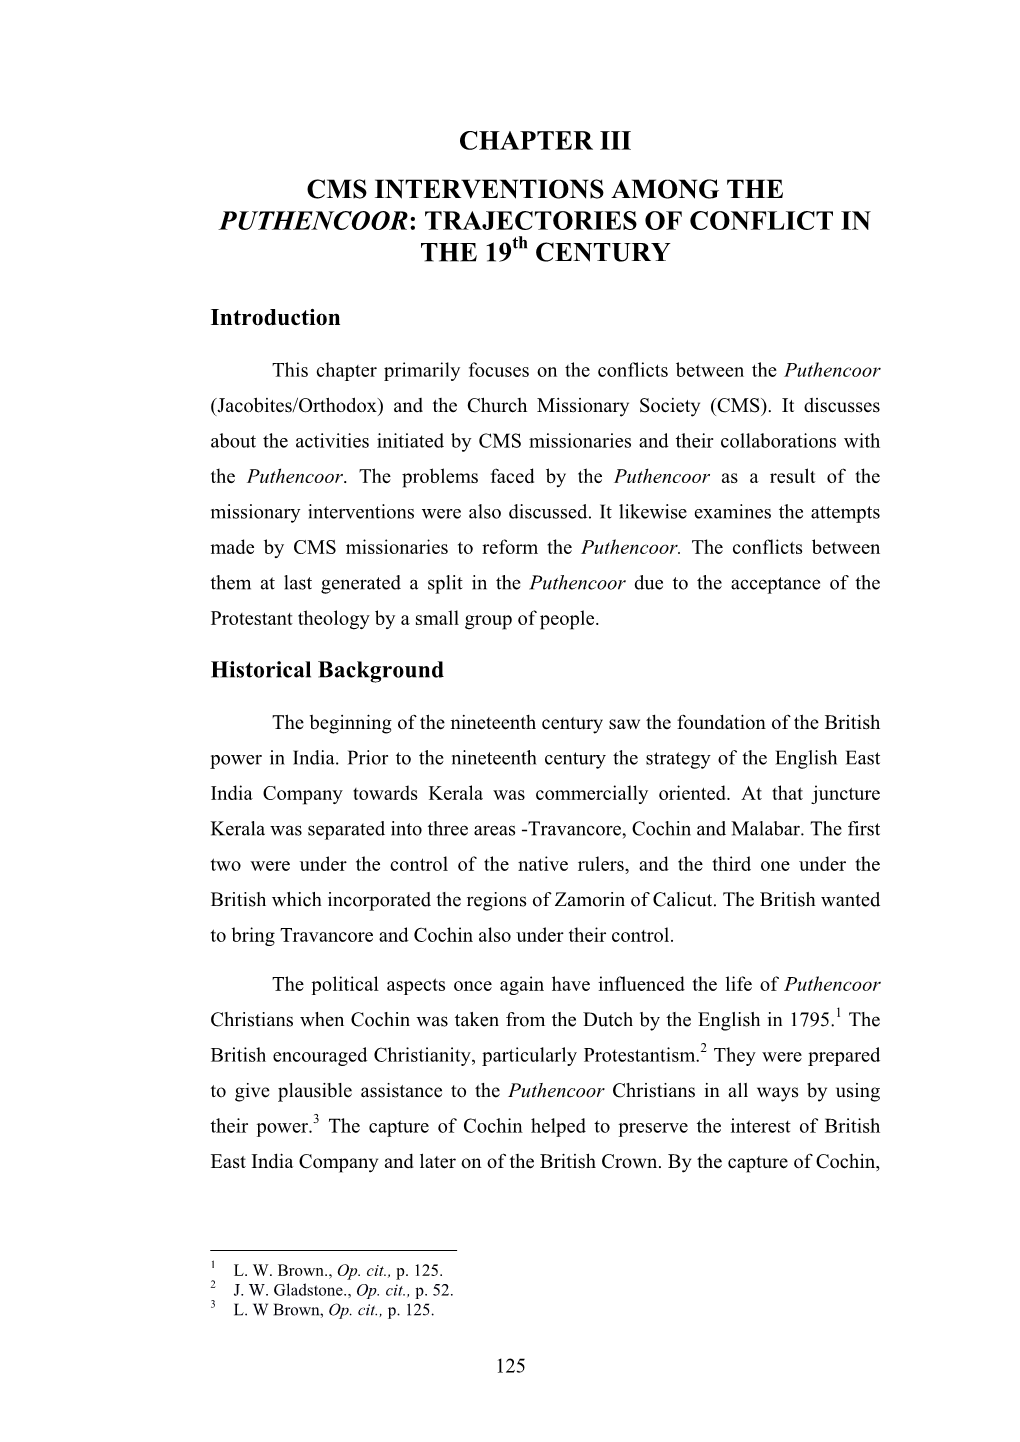 CHAPTER III CMS INTERVENTIONS AMONG the PUTHENCOOR: TRAJECTORIES of CONFLICT in the 19Th CENTURY